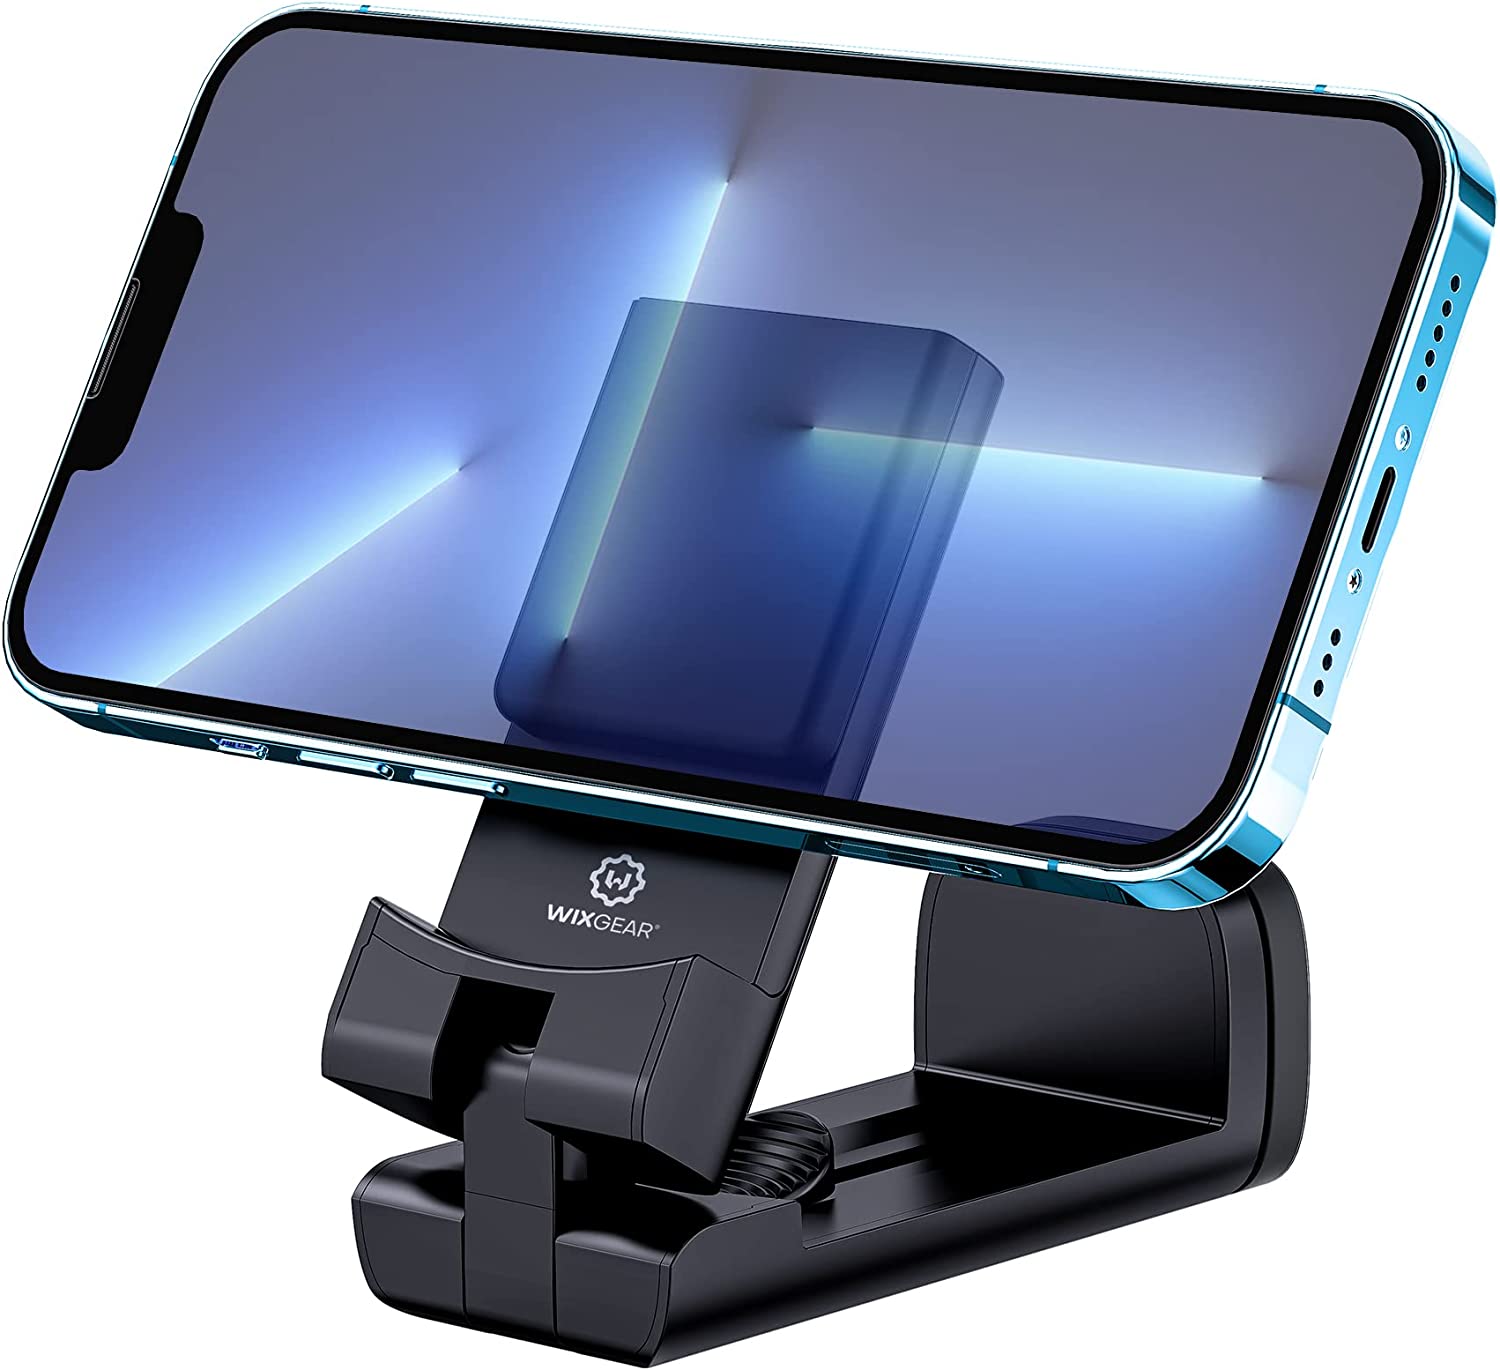 Wixgear Universal Magnetic Airplane in Flight Tablet Phone Mount, Phone Holder for Desk with Multi-Directional Dual 360 Degree Rotation, Pocket Size